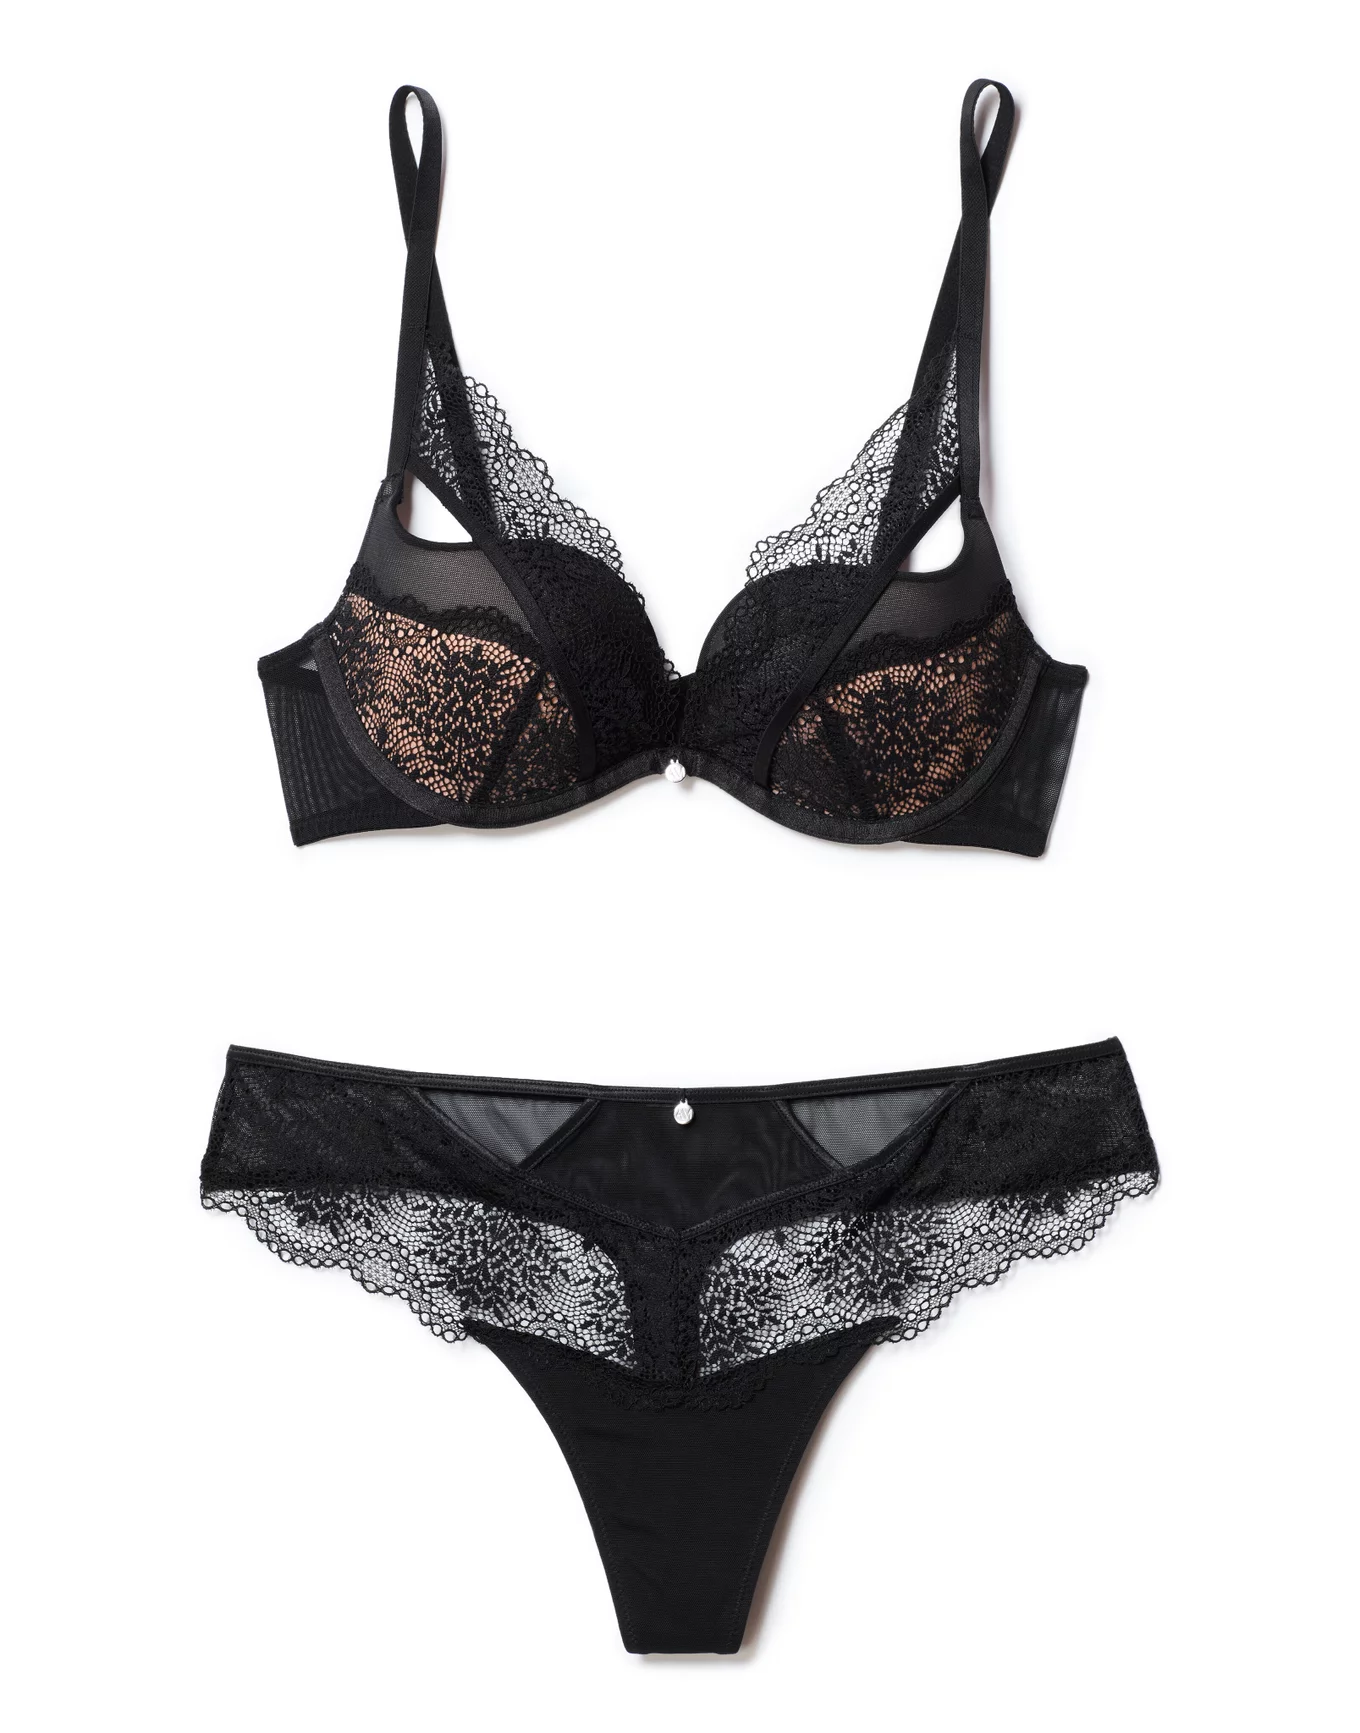 Classy Lace Lingerie Set With Bra and Panty one Push-up Bra Half